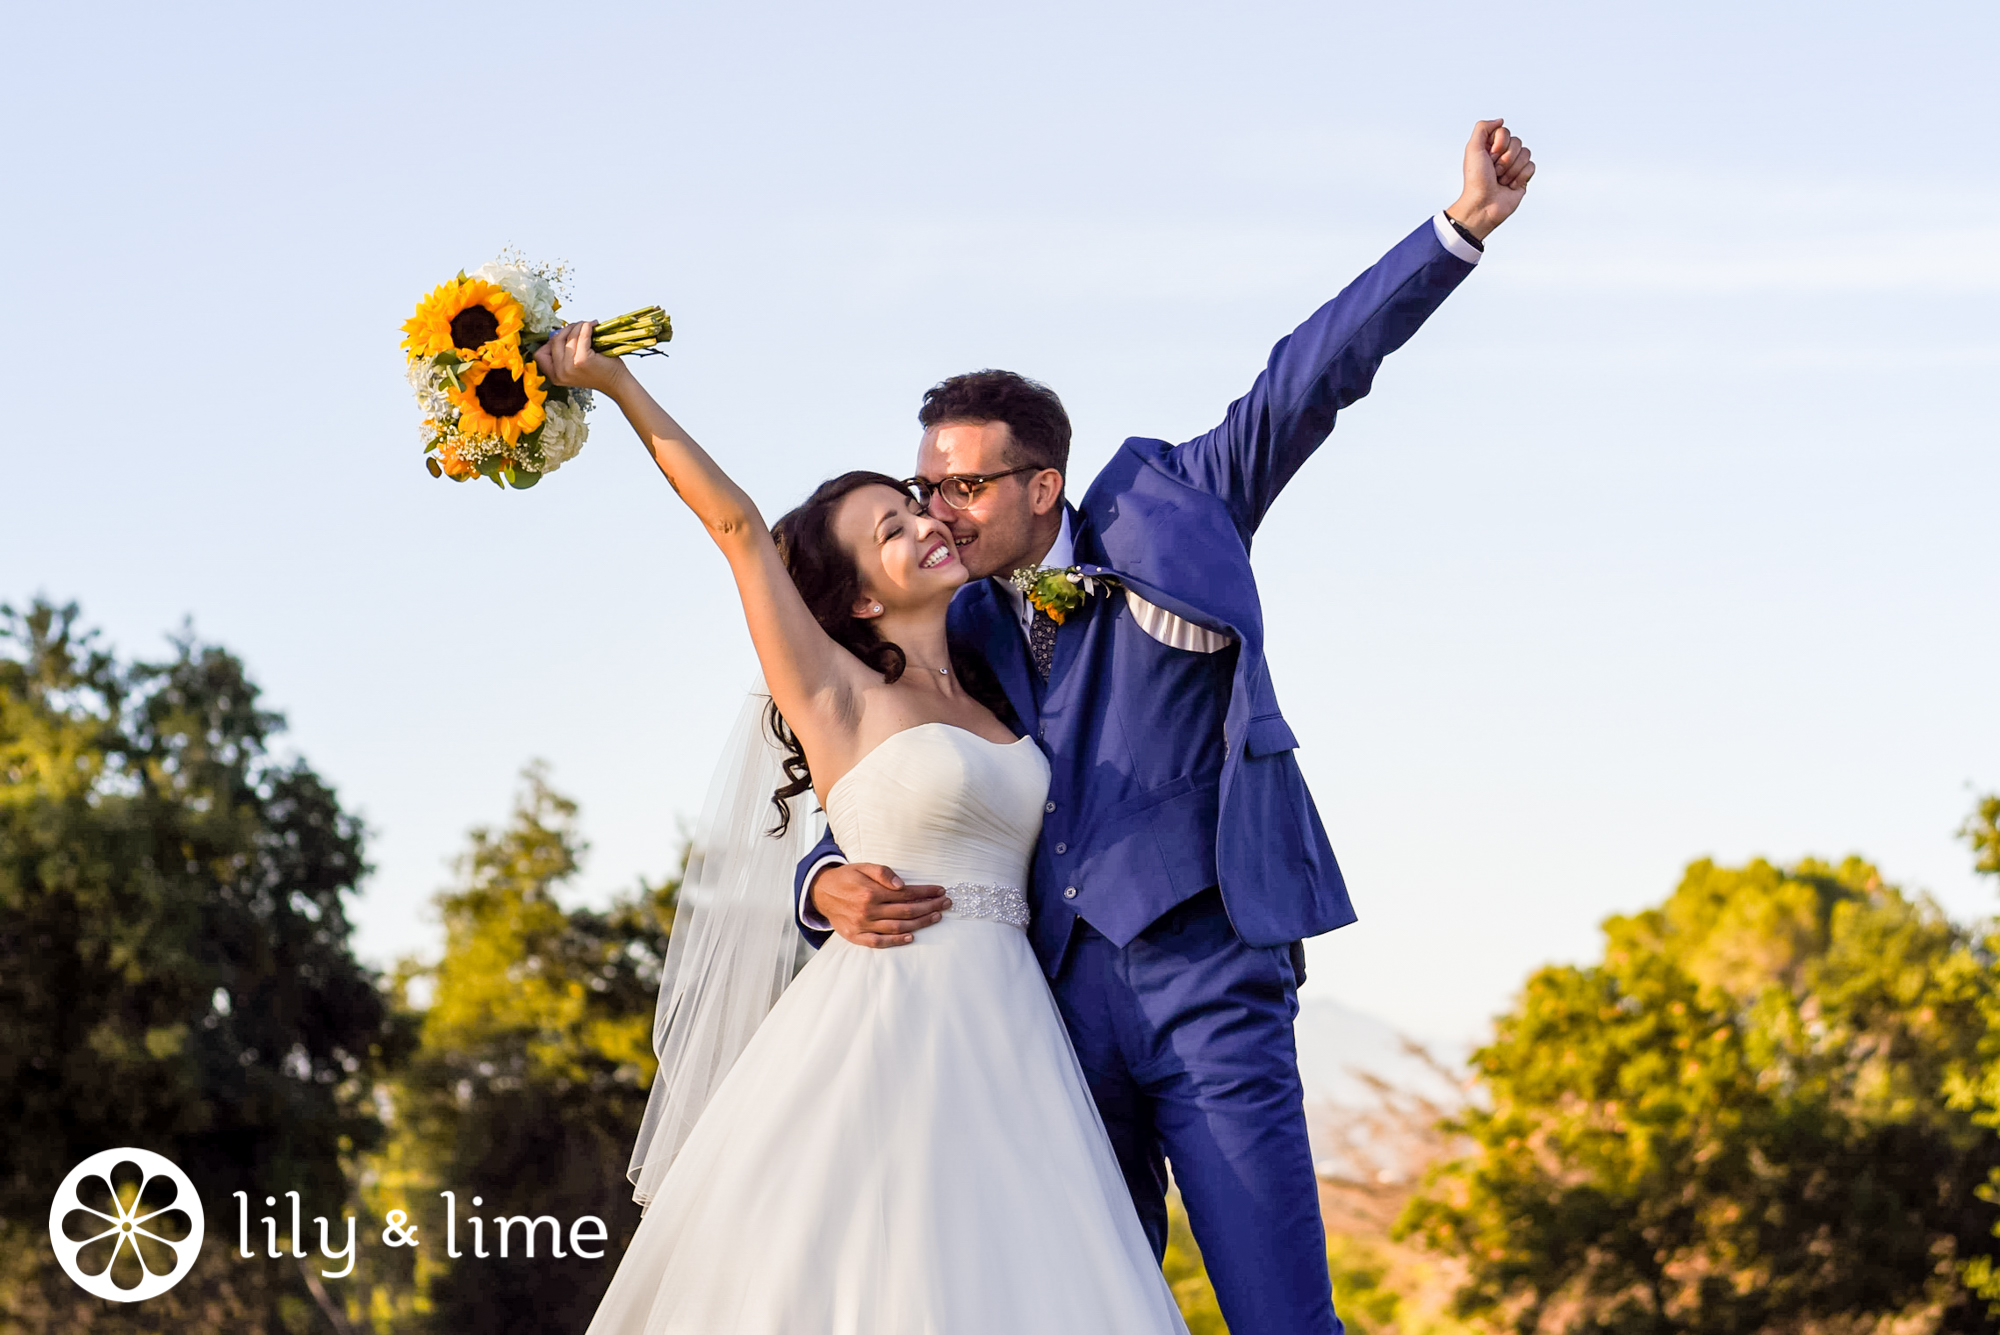 ways to simplify your wedding photographer search